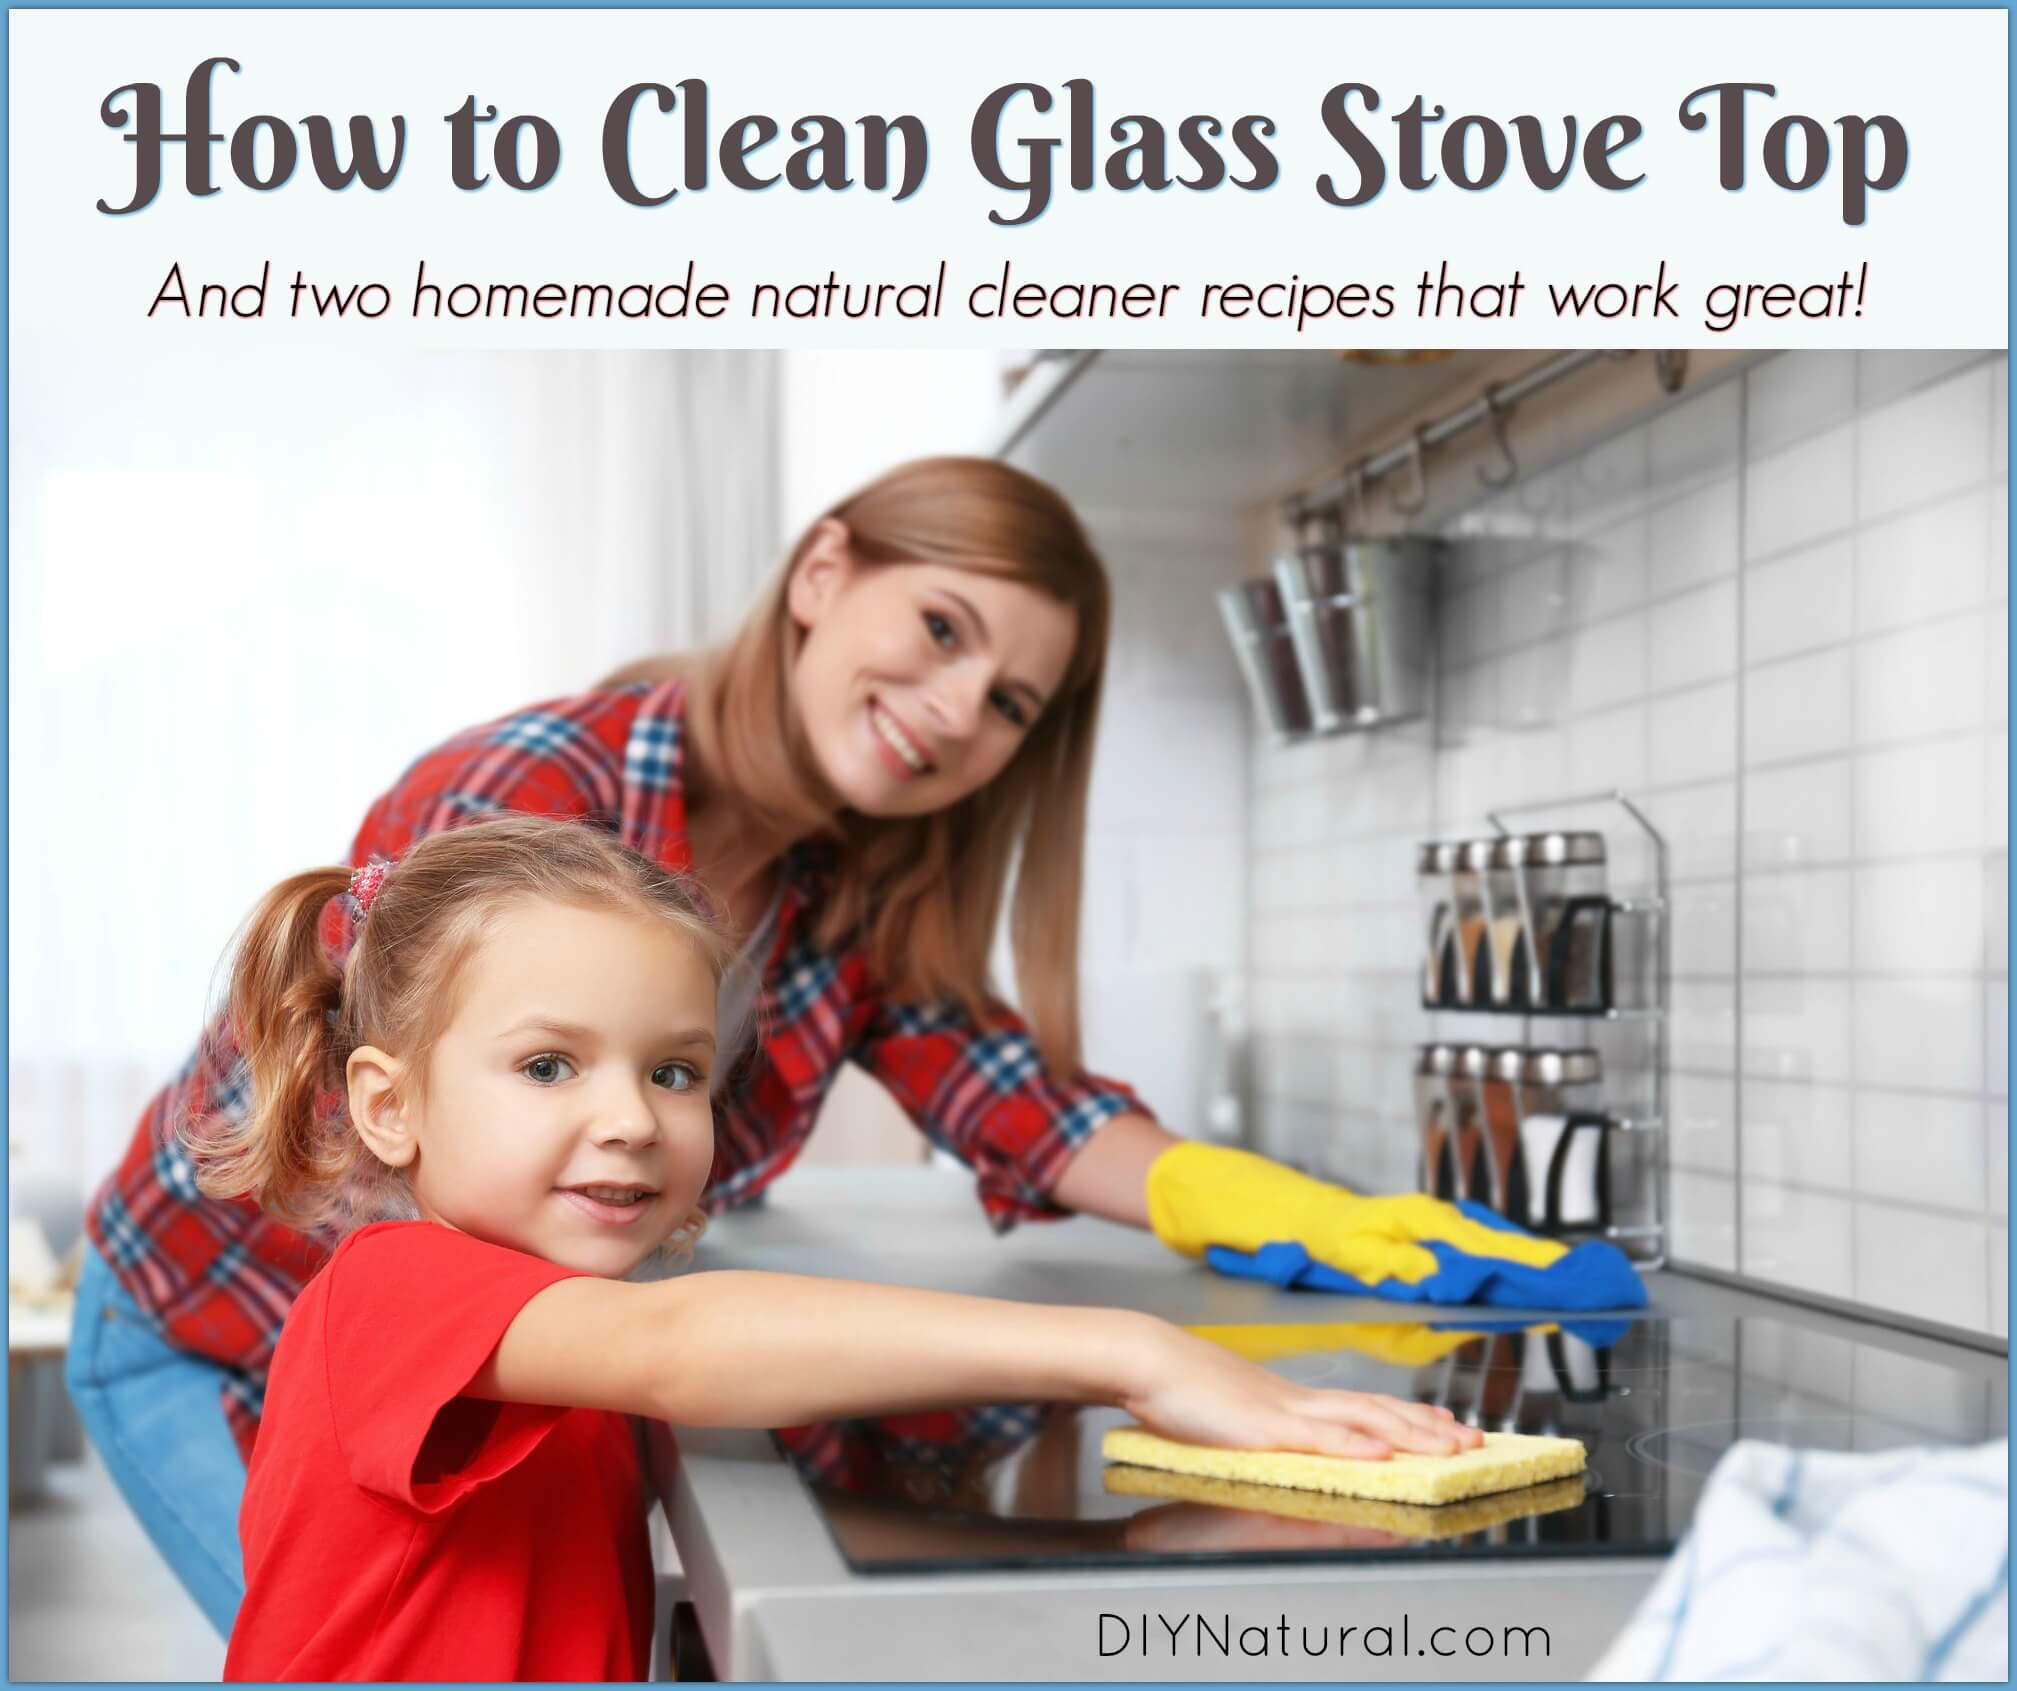 How to Clean Glass Stove Top: A